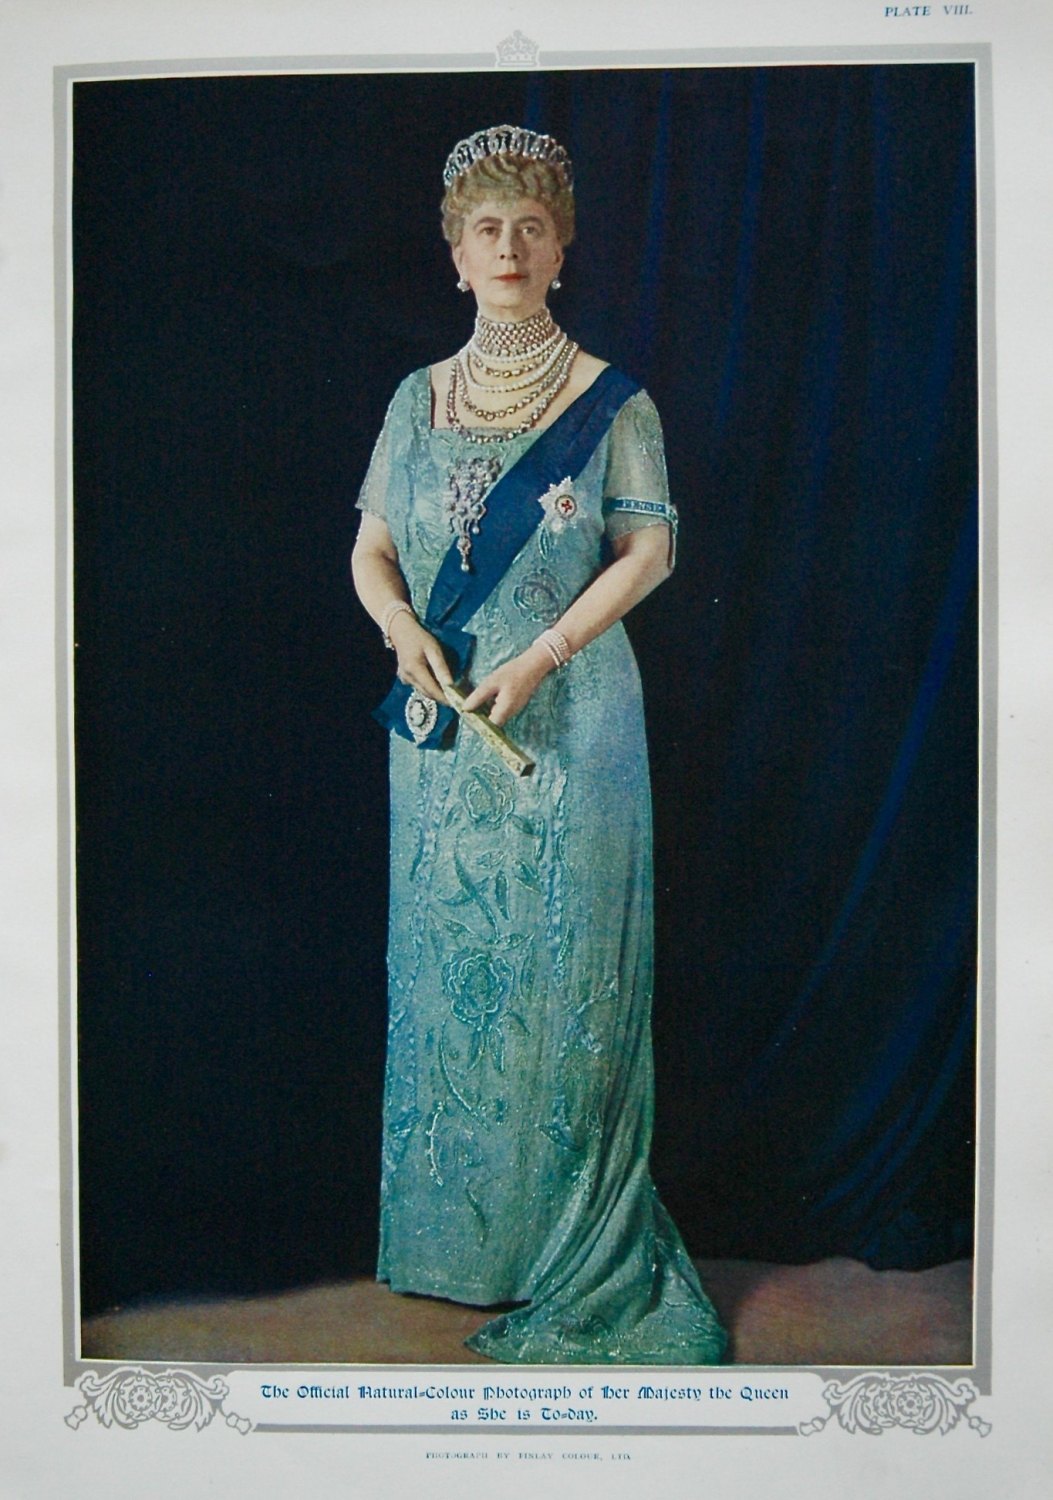 Official Natural-Colour Photograph of her Majesty the Queen as She is To-da